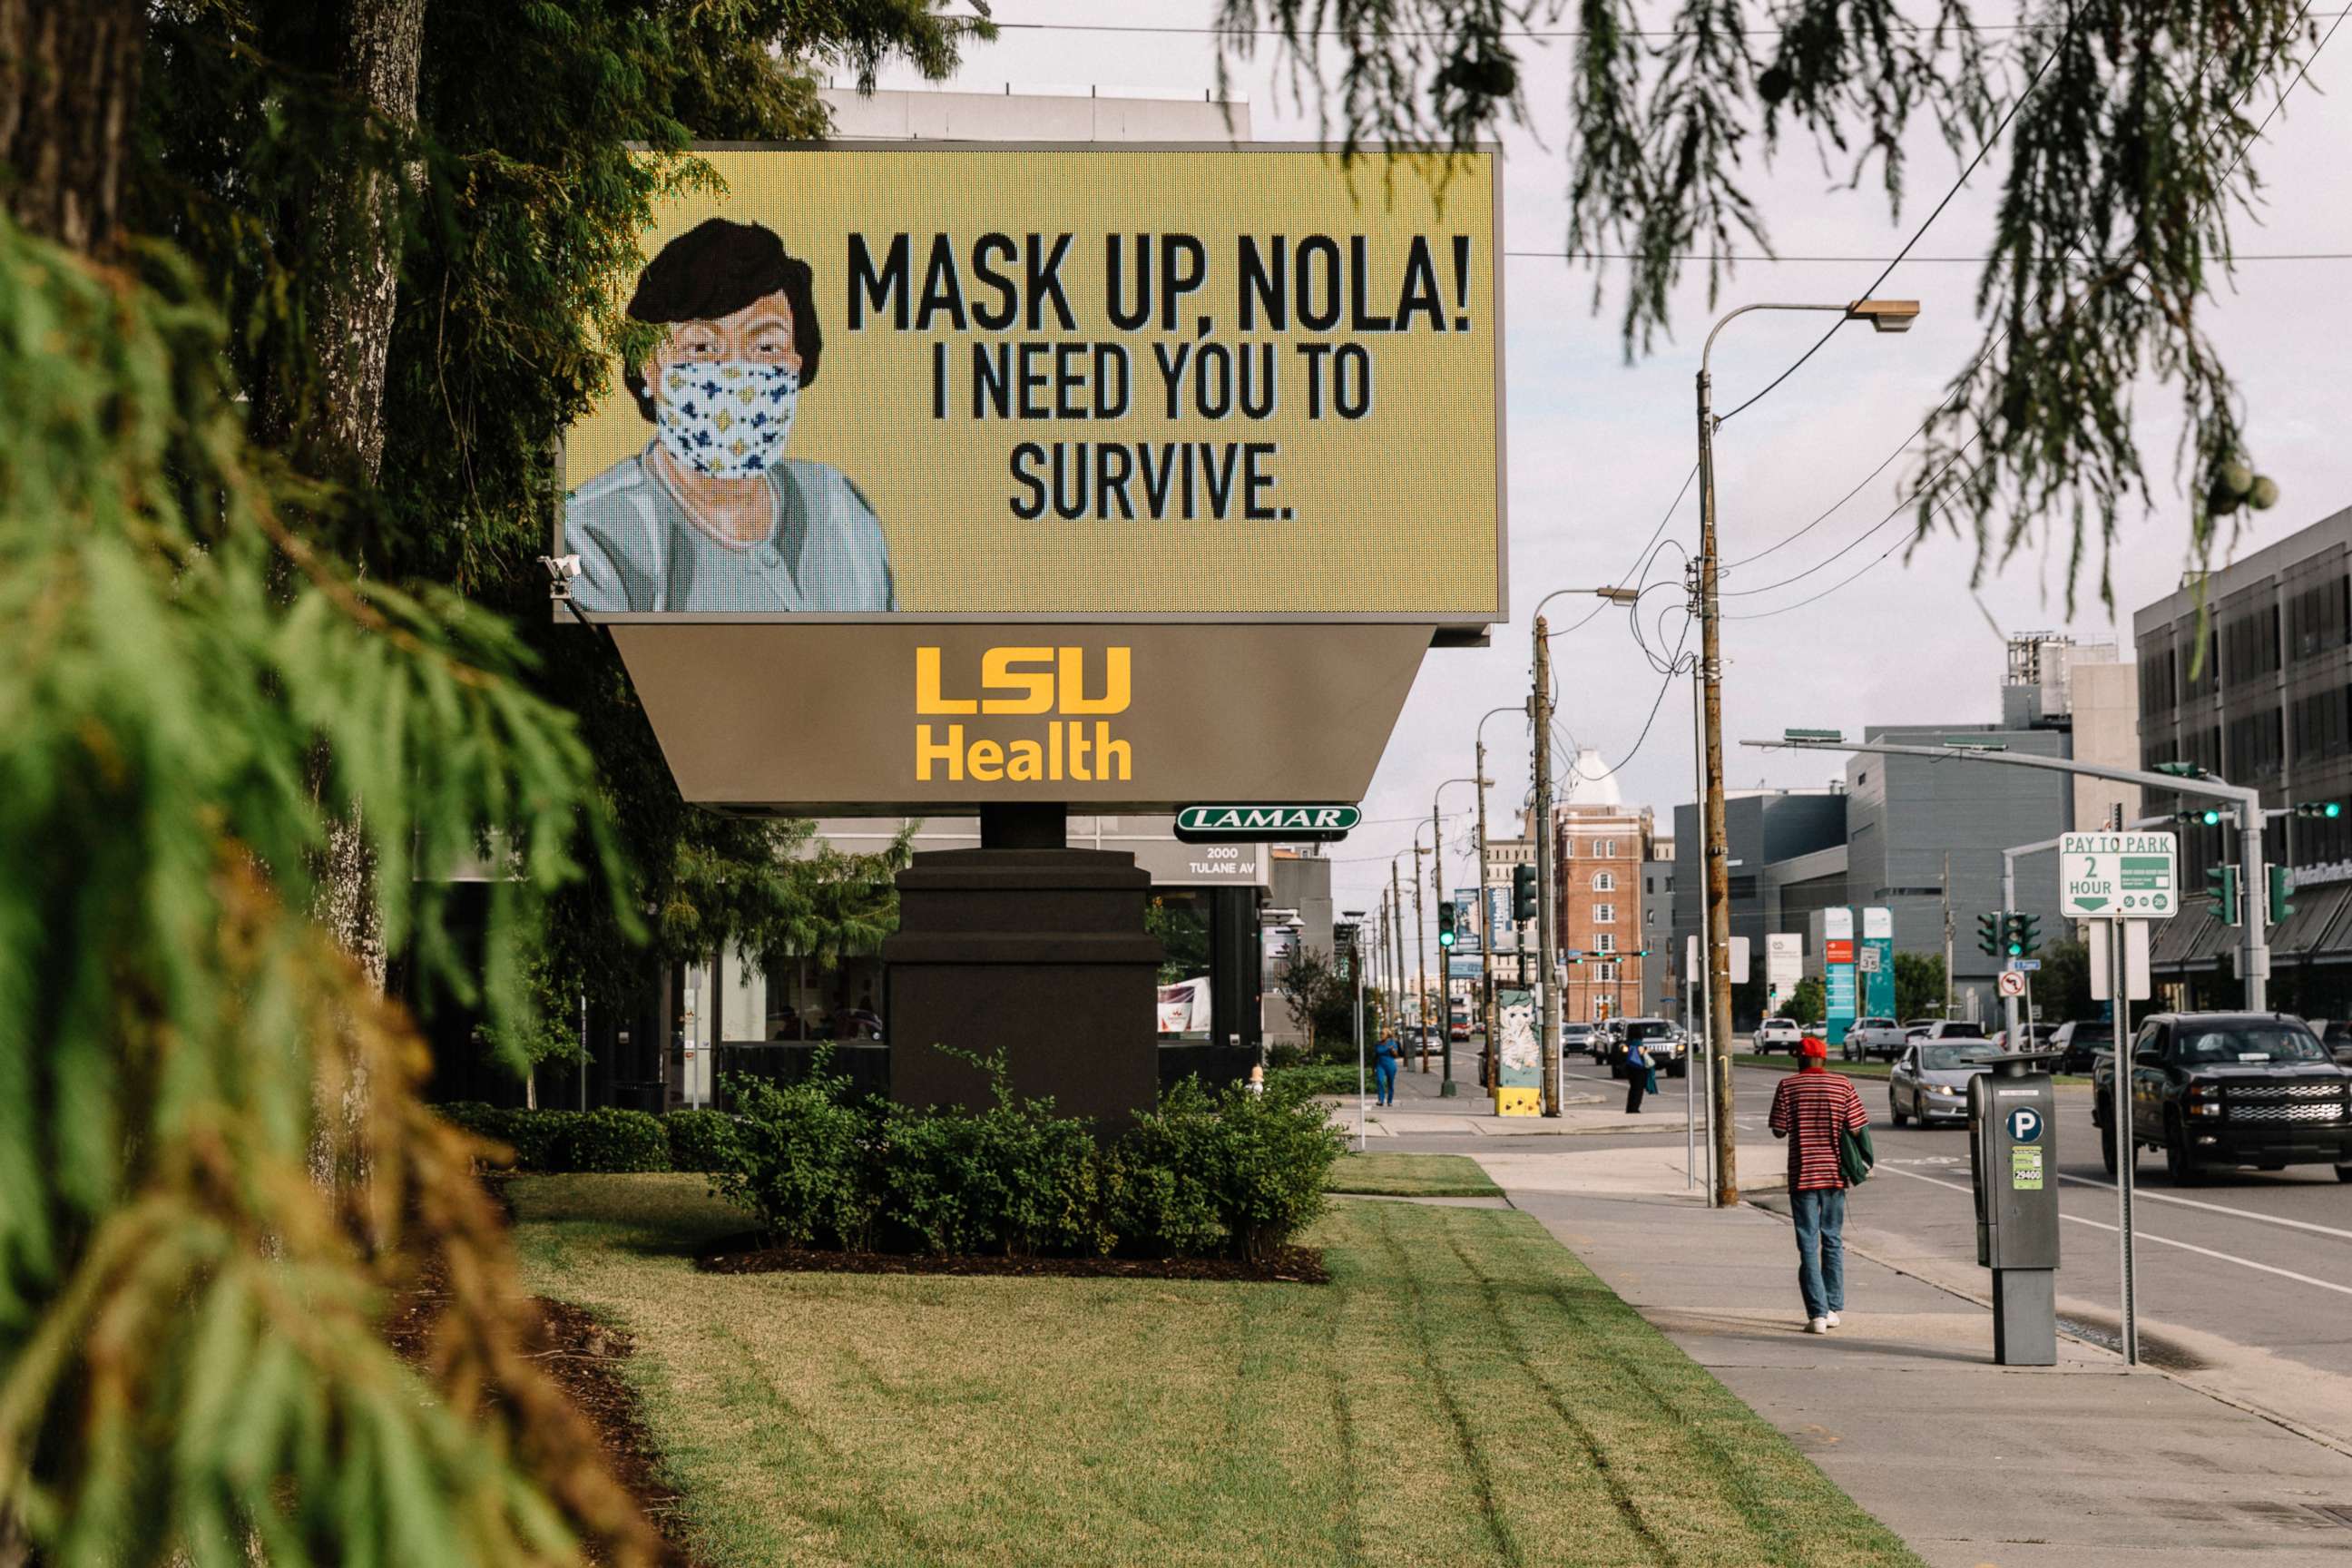 PHOTO: An electronic message board displays a rendering of New Orleans Mayor Latoya Cantrell wearing a face mask, along with a message to mask up, at the Louisiana State University Medical Center in New Orleans, July 28, 2020.